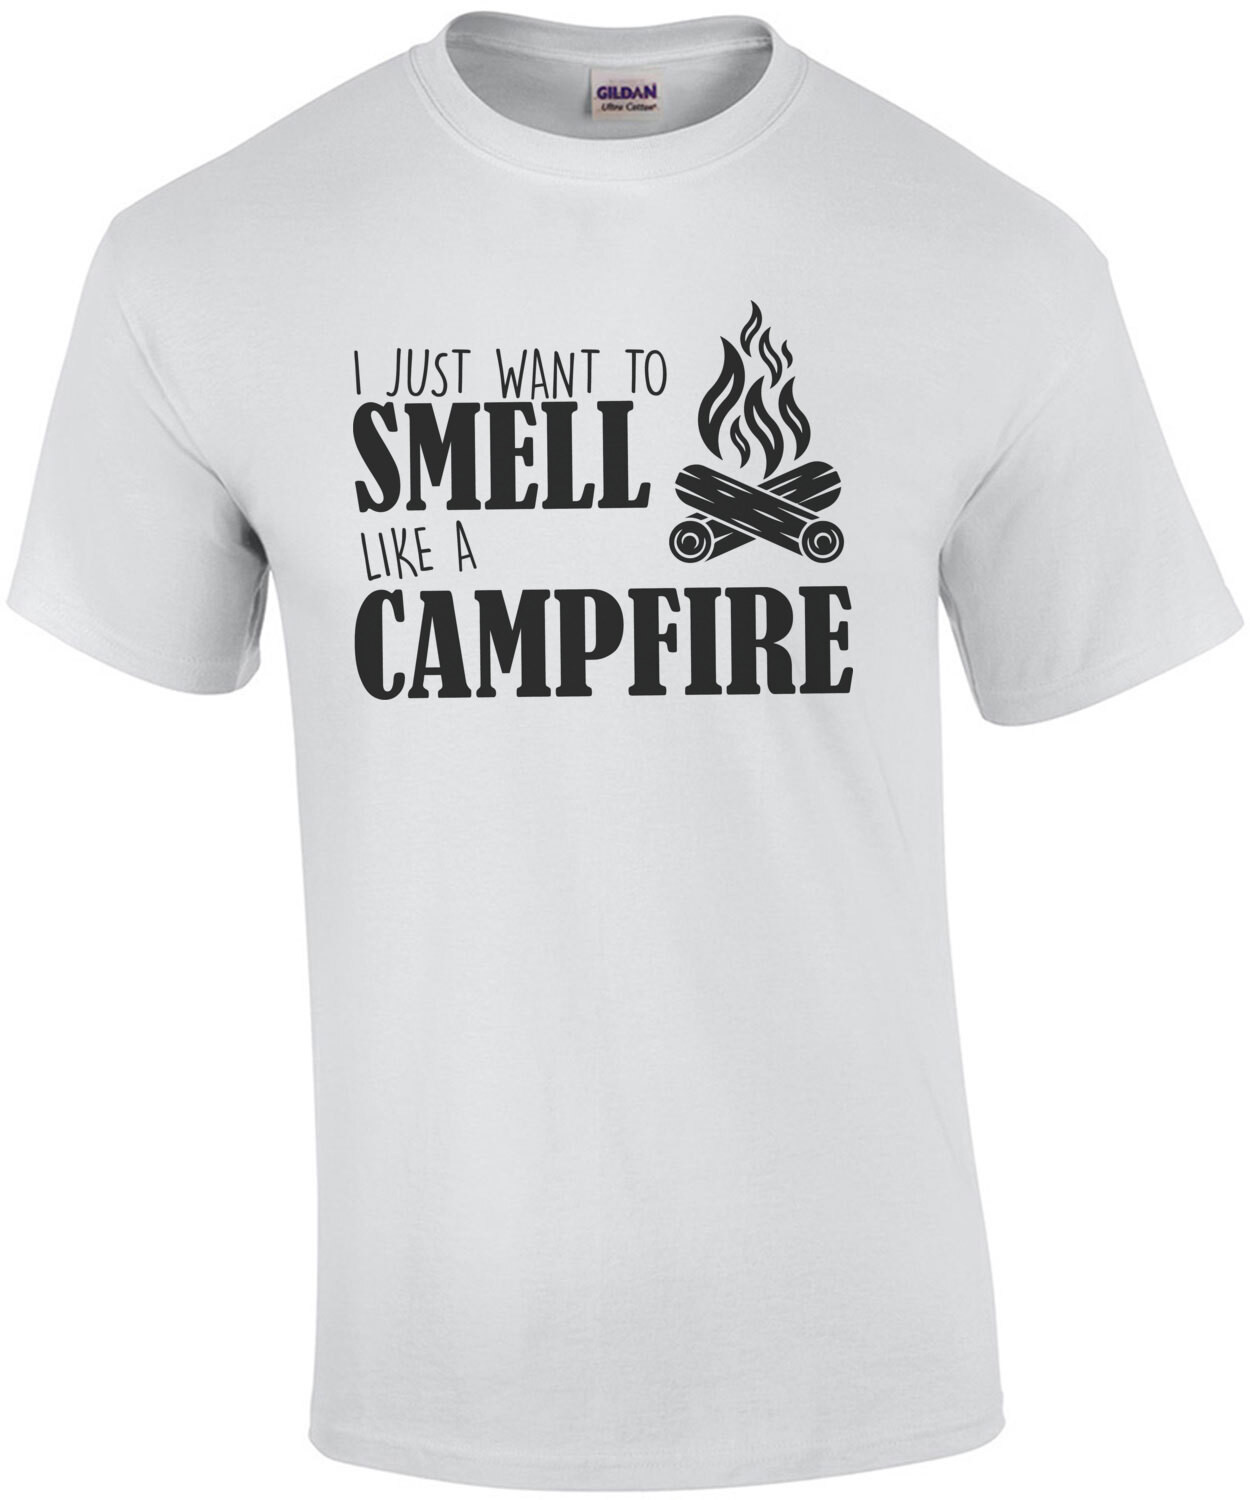 I just want to smell like a campfire - Camping T-Shirt